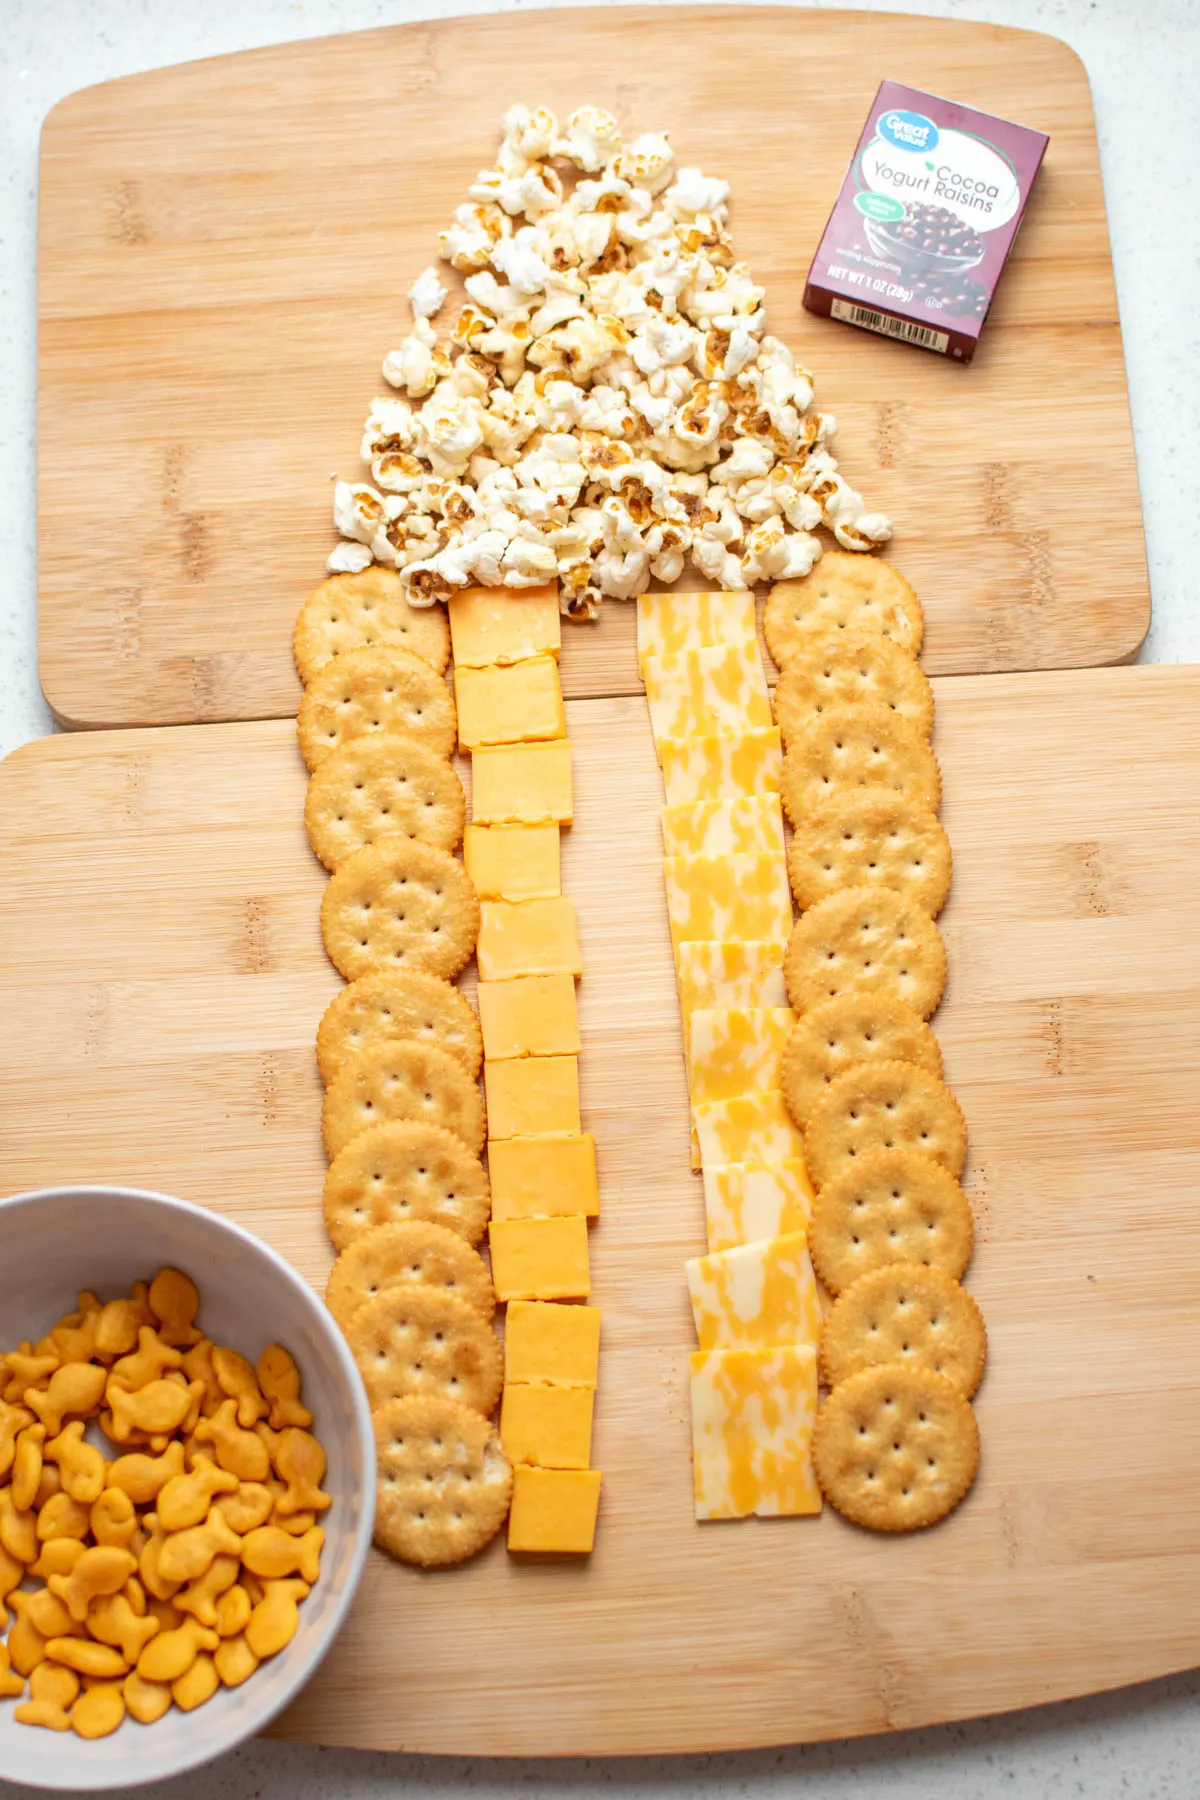 Crackers, cheese, and popcorn on wooden cutting board arranged in a neat pattern.